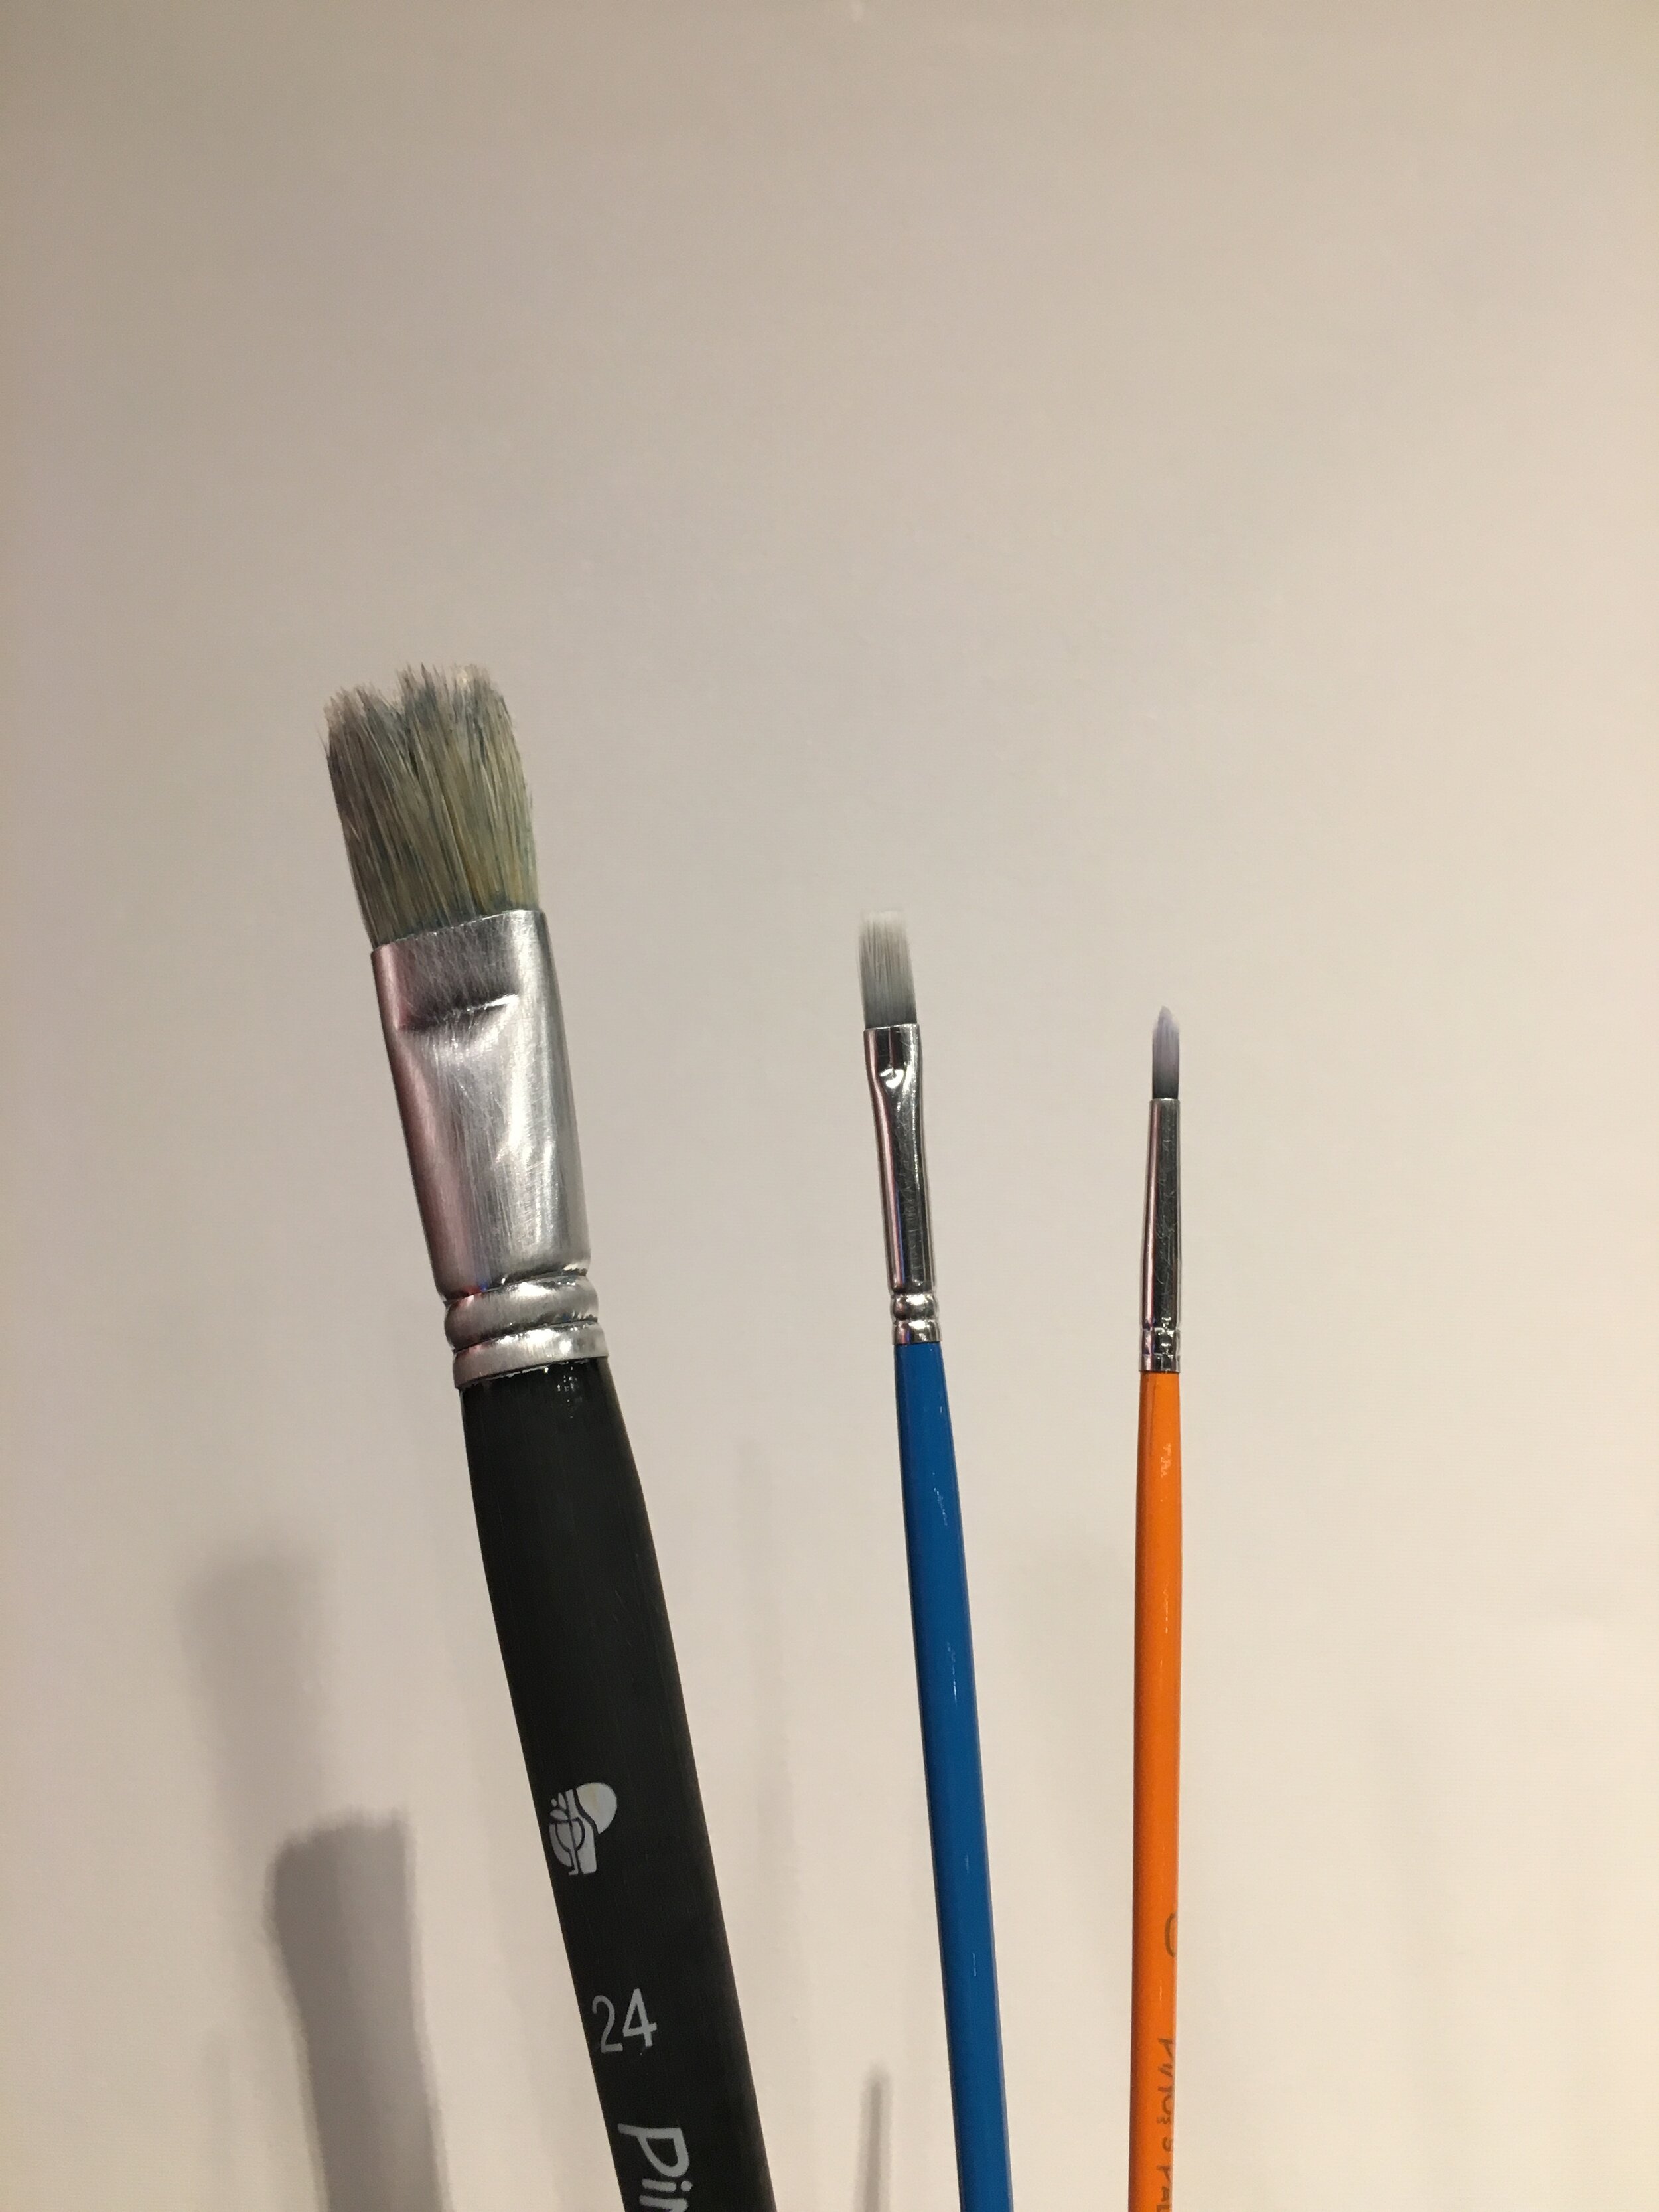 Two or three brushes are enough